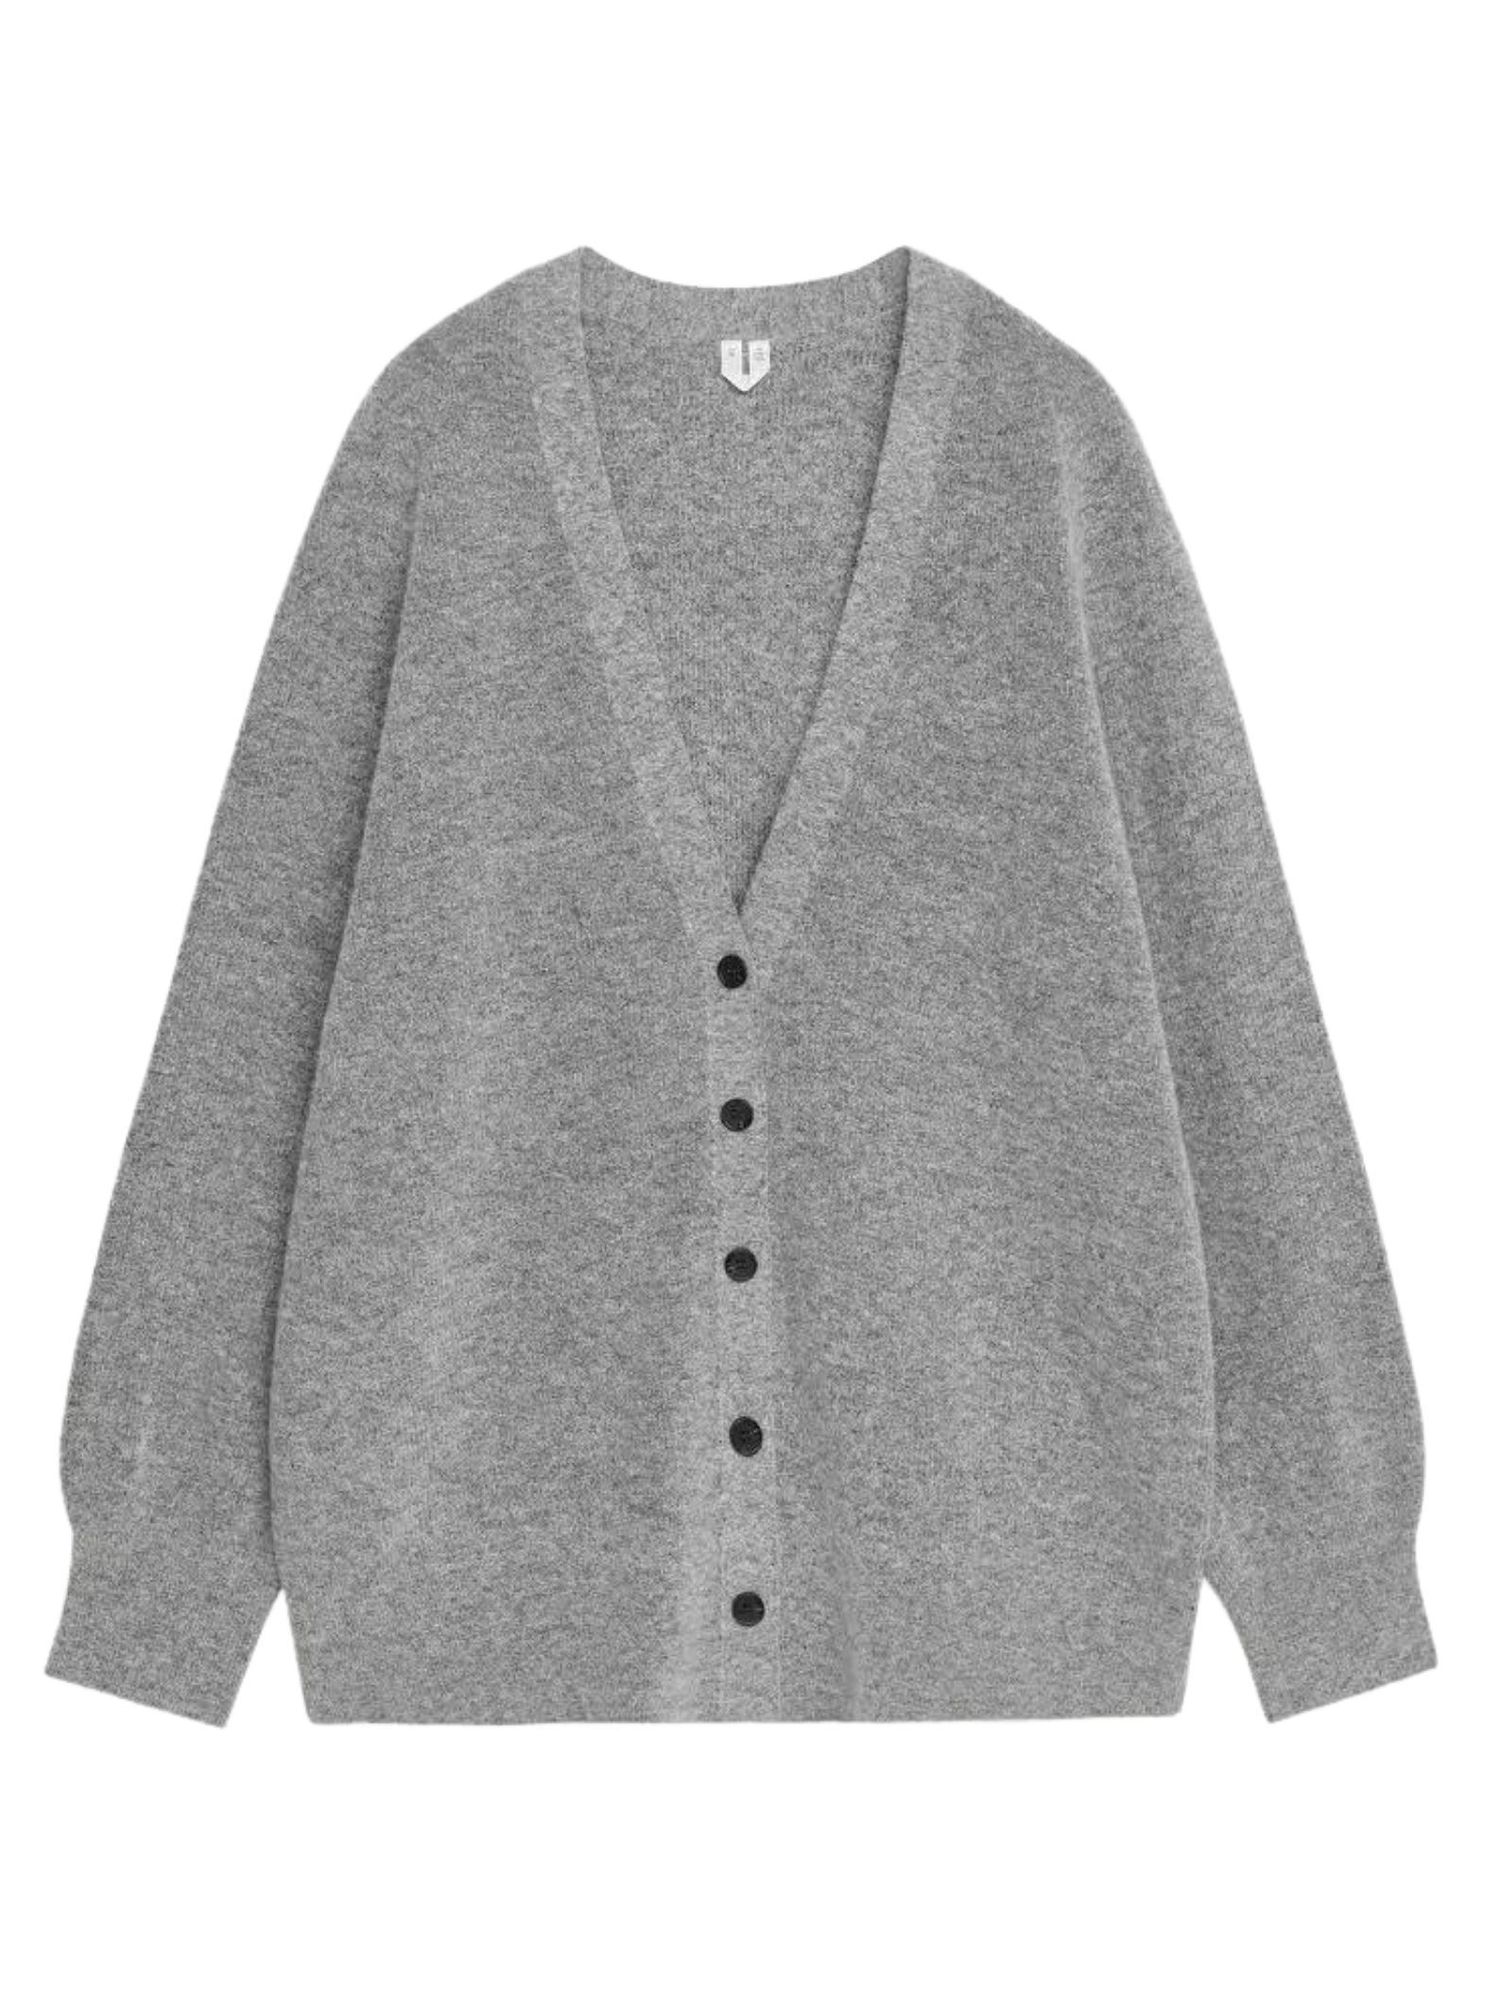 Stay warm with these 6 classic knitted cardigans - Vogue Scandinavia